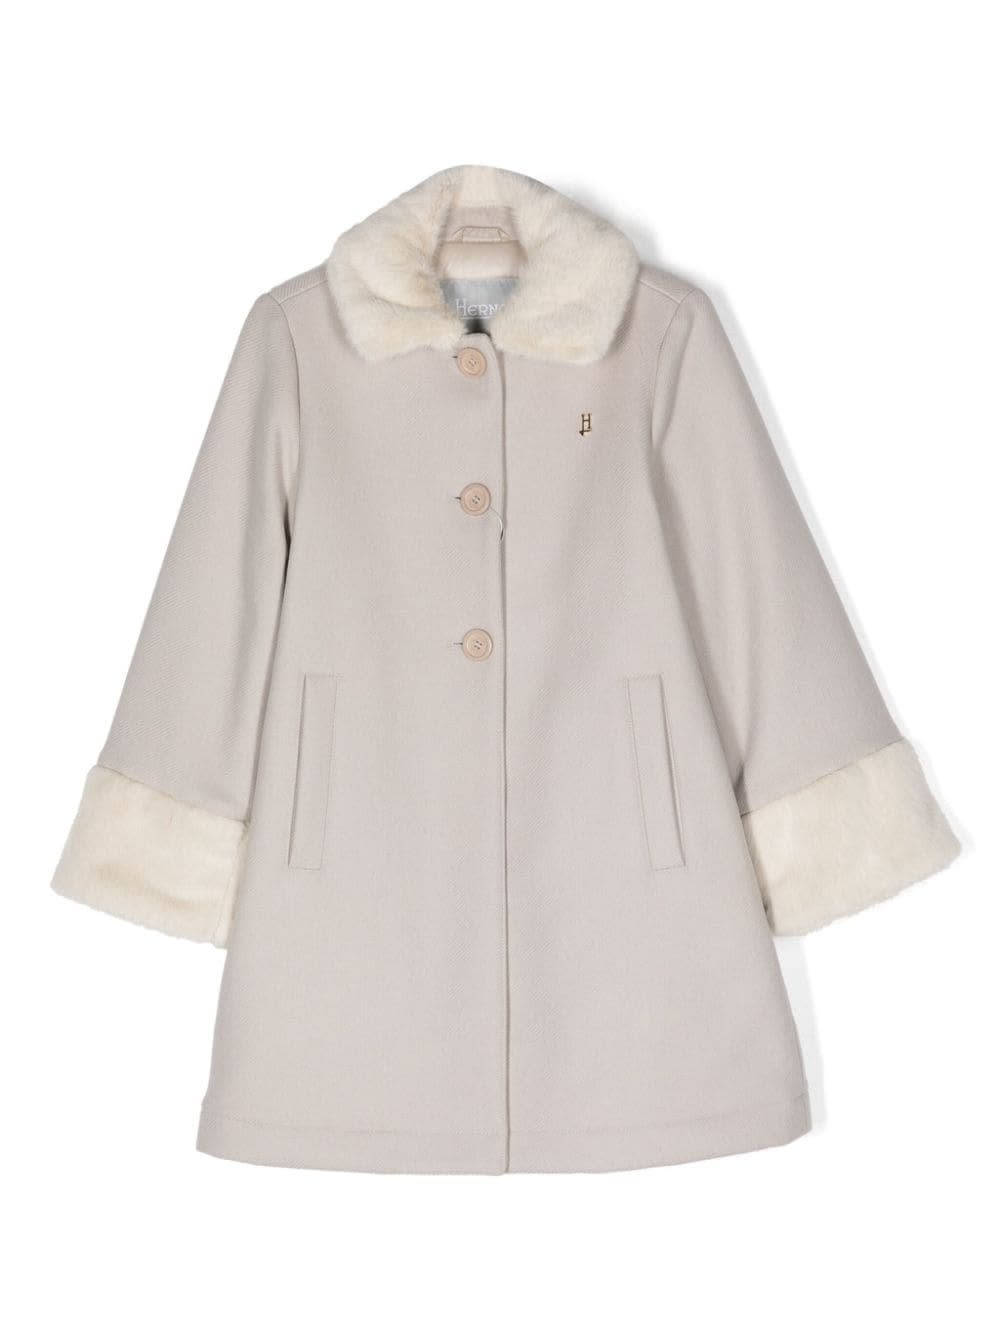 Herno Kids' Coat With Logo In Gray